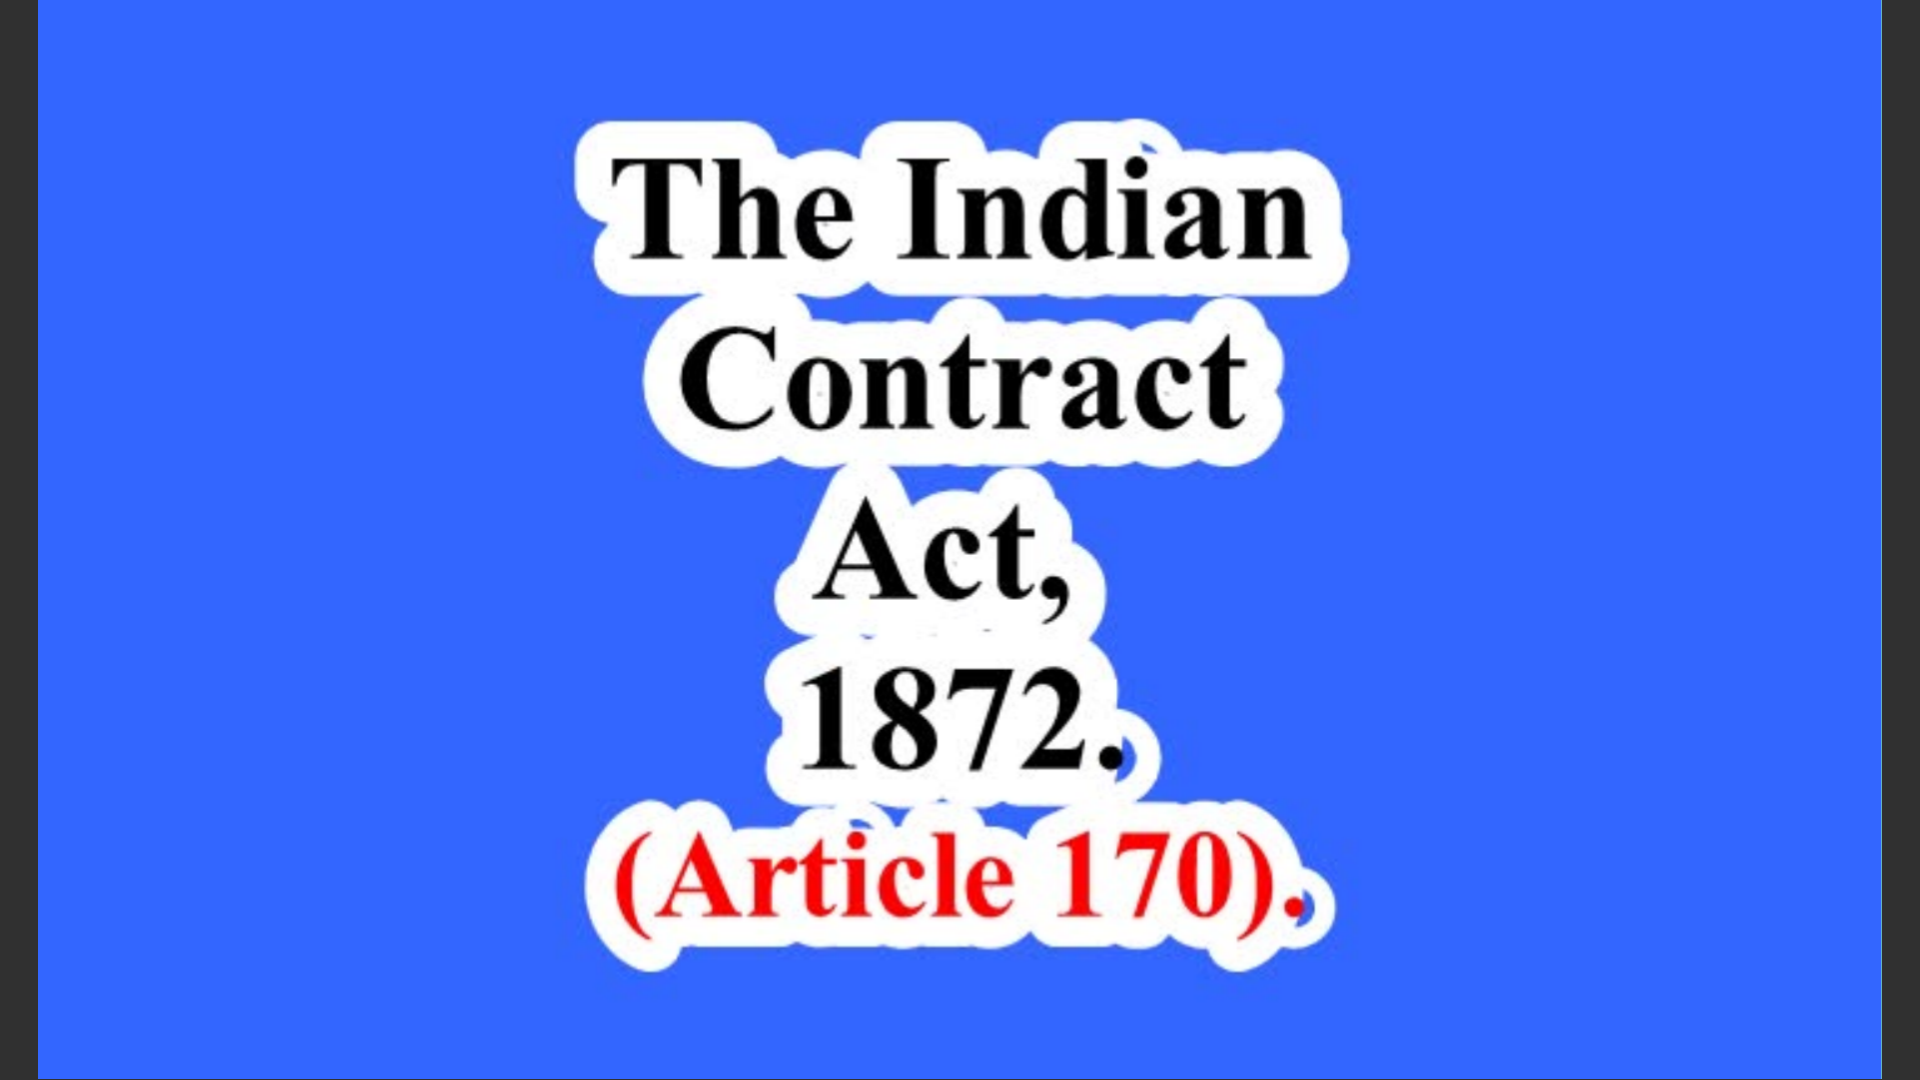 The Indian Contract Act, 1872. (Article 170).